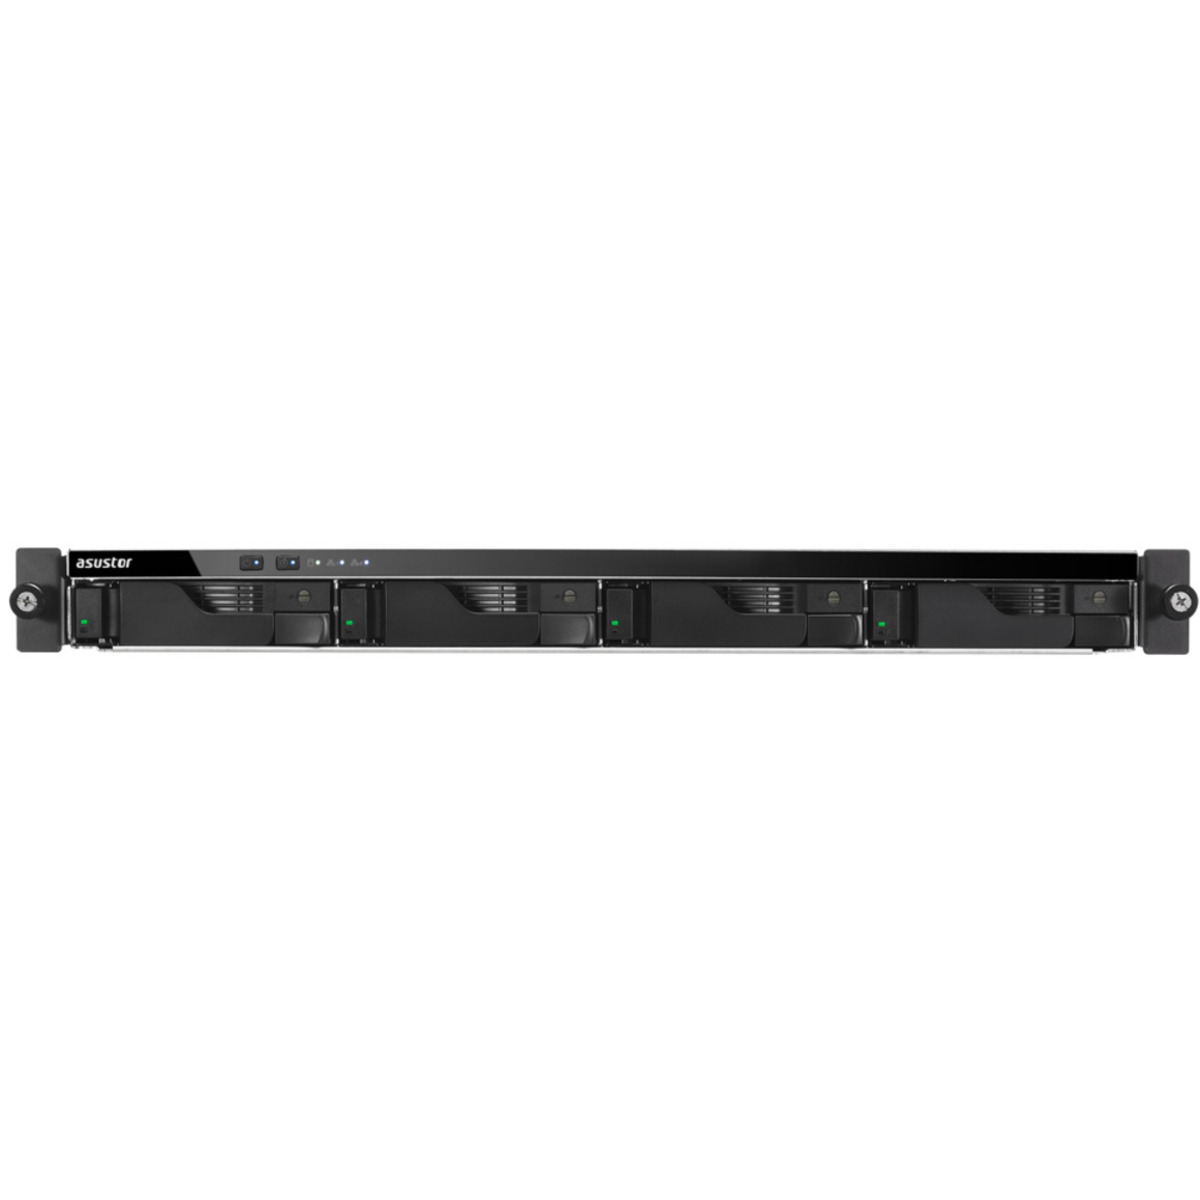 buy $3299 ASUSTOR LOCKERSTOR 4RD AS6504RD 80tb RackMount NAS - Network Attached Storage Device 4x20000gb Western Digital Ultrastar DC HC560 WUH722020ALE6L4 3.5 7200rpm SATA 6Gb/s HDD ENTERPRISE Class Drives Installed - Burn-In Tested - FREE RAM UPGRADE - nas headquarters buy network attached storage server device das new raid-5 free shipping simply usa LOCKERSTOR 4RD AS6504RD